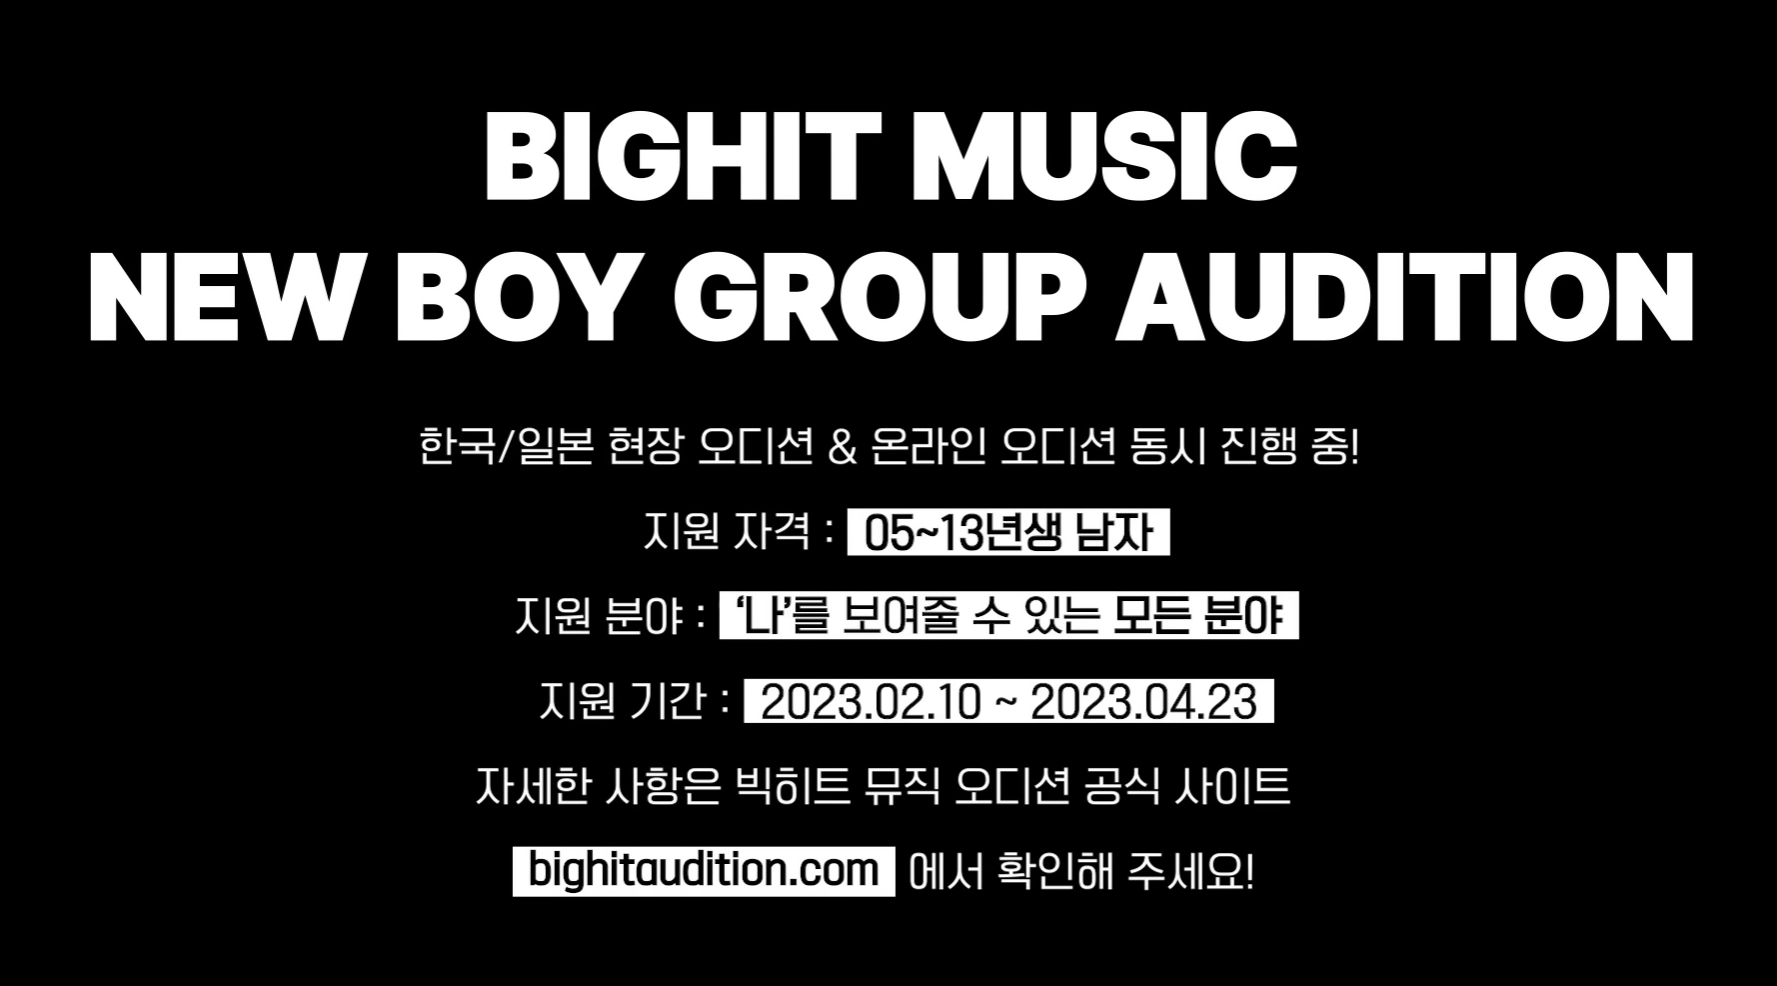 BIGHIT MUSIC NEW BOY GROUP AUDITION